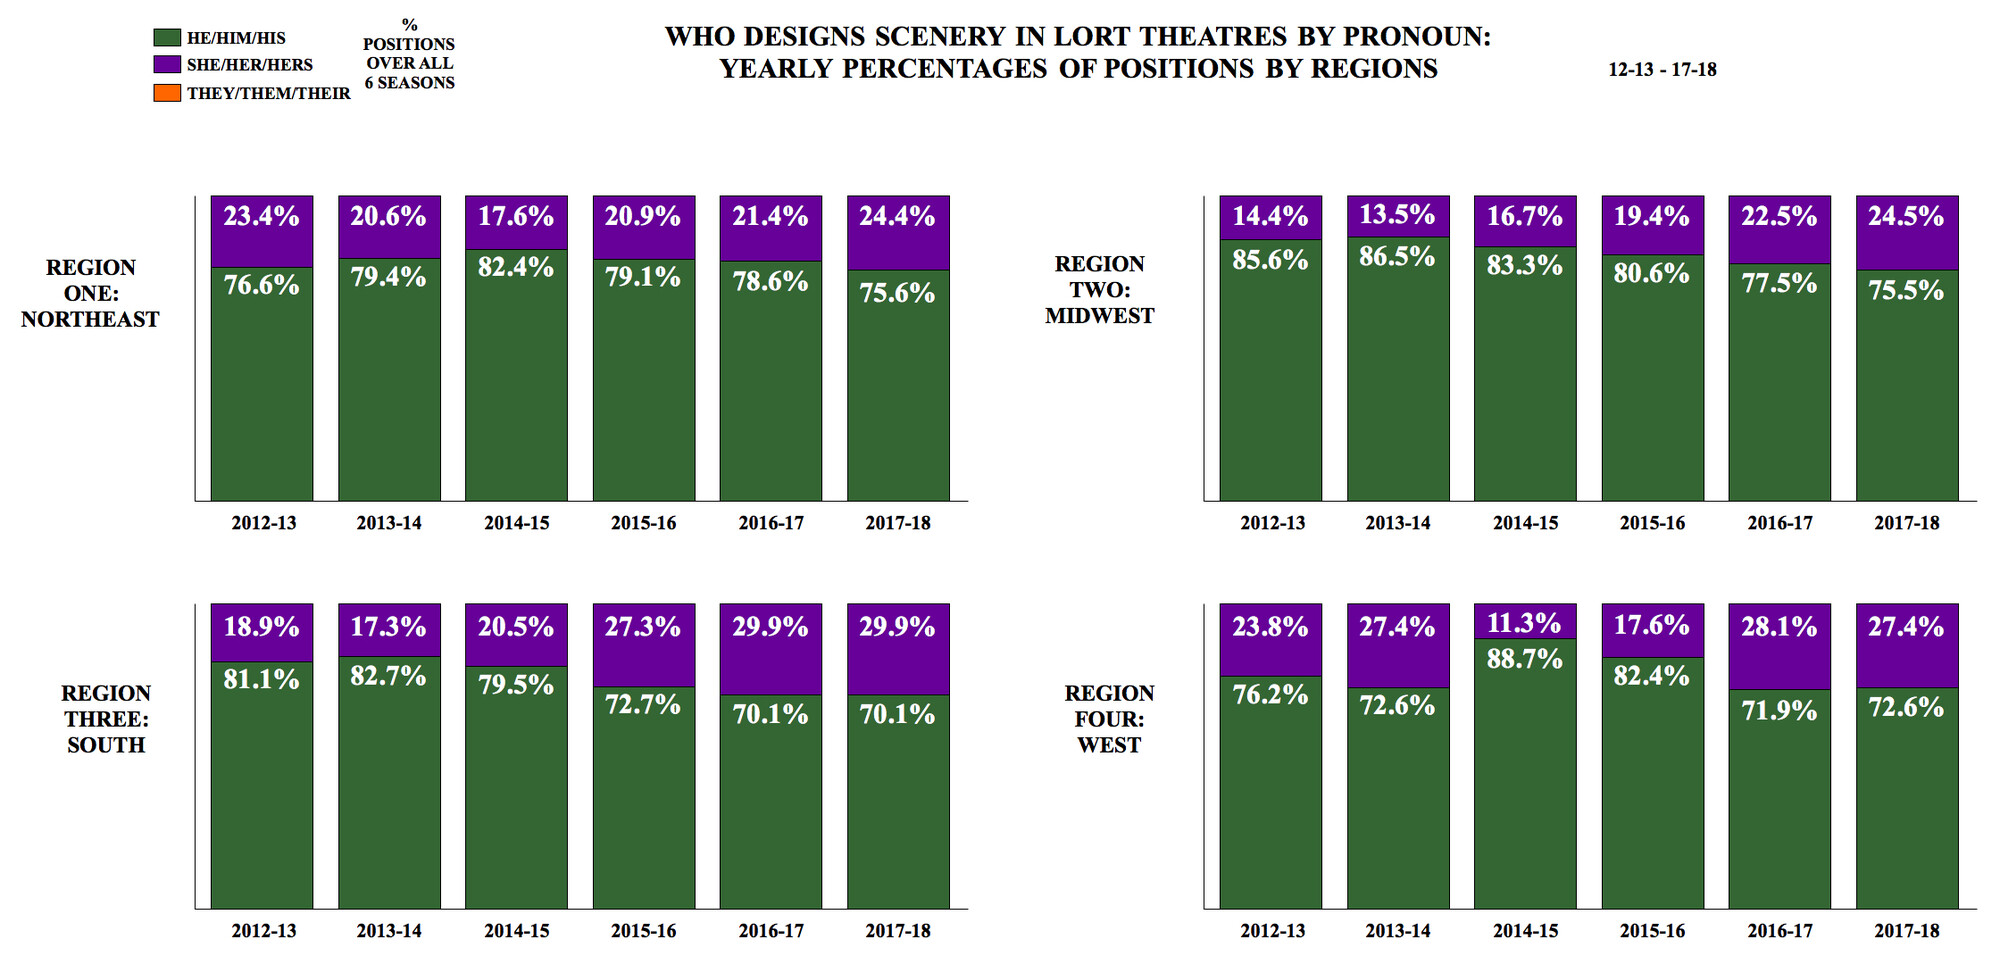 Who Designs Scenery in LORT Theatres by Pronoun: Yearly Percentages of Positions by Regions